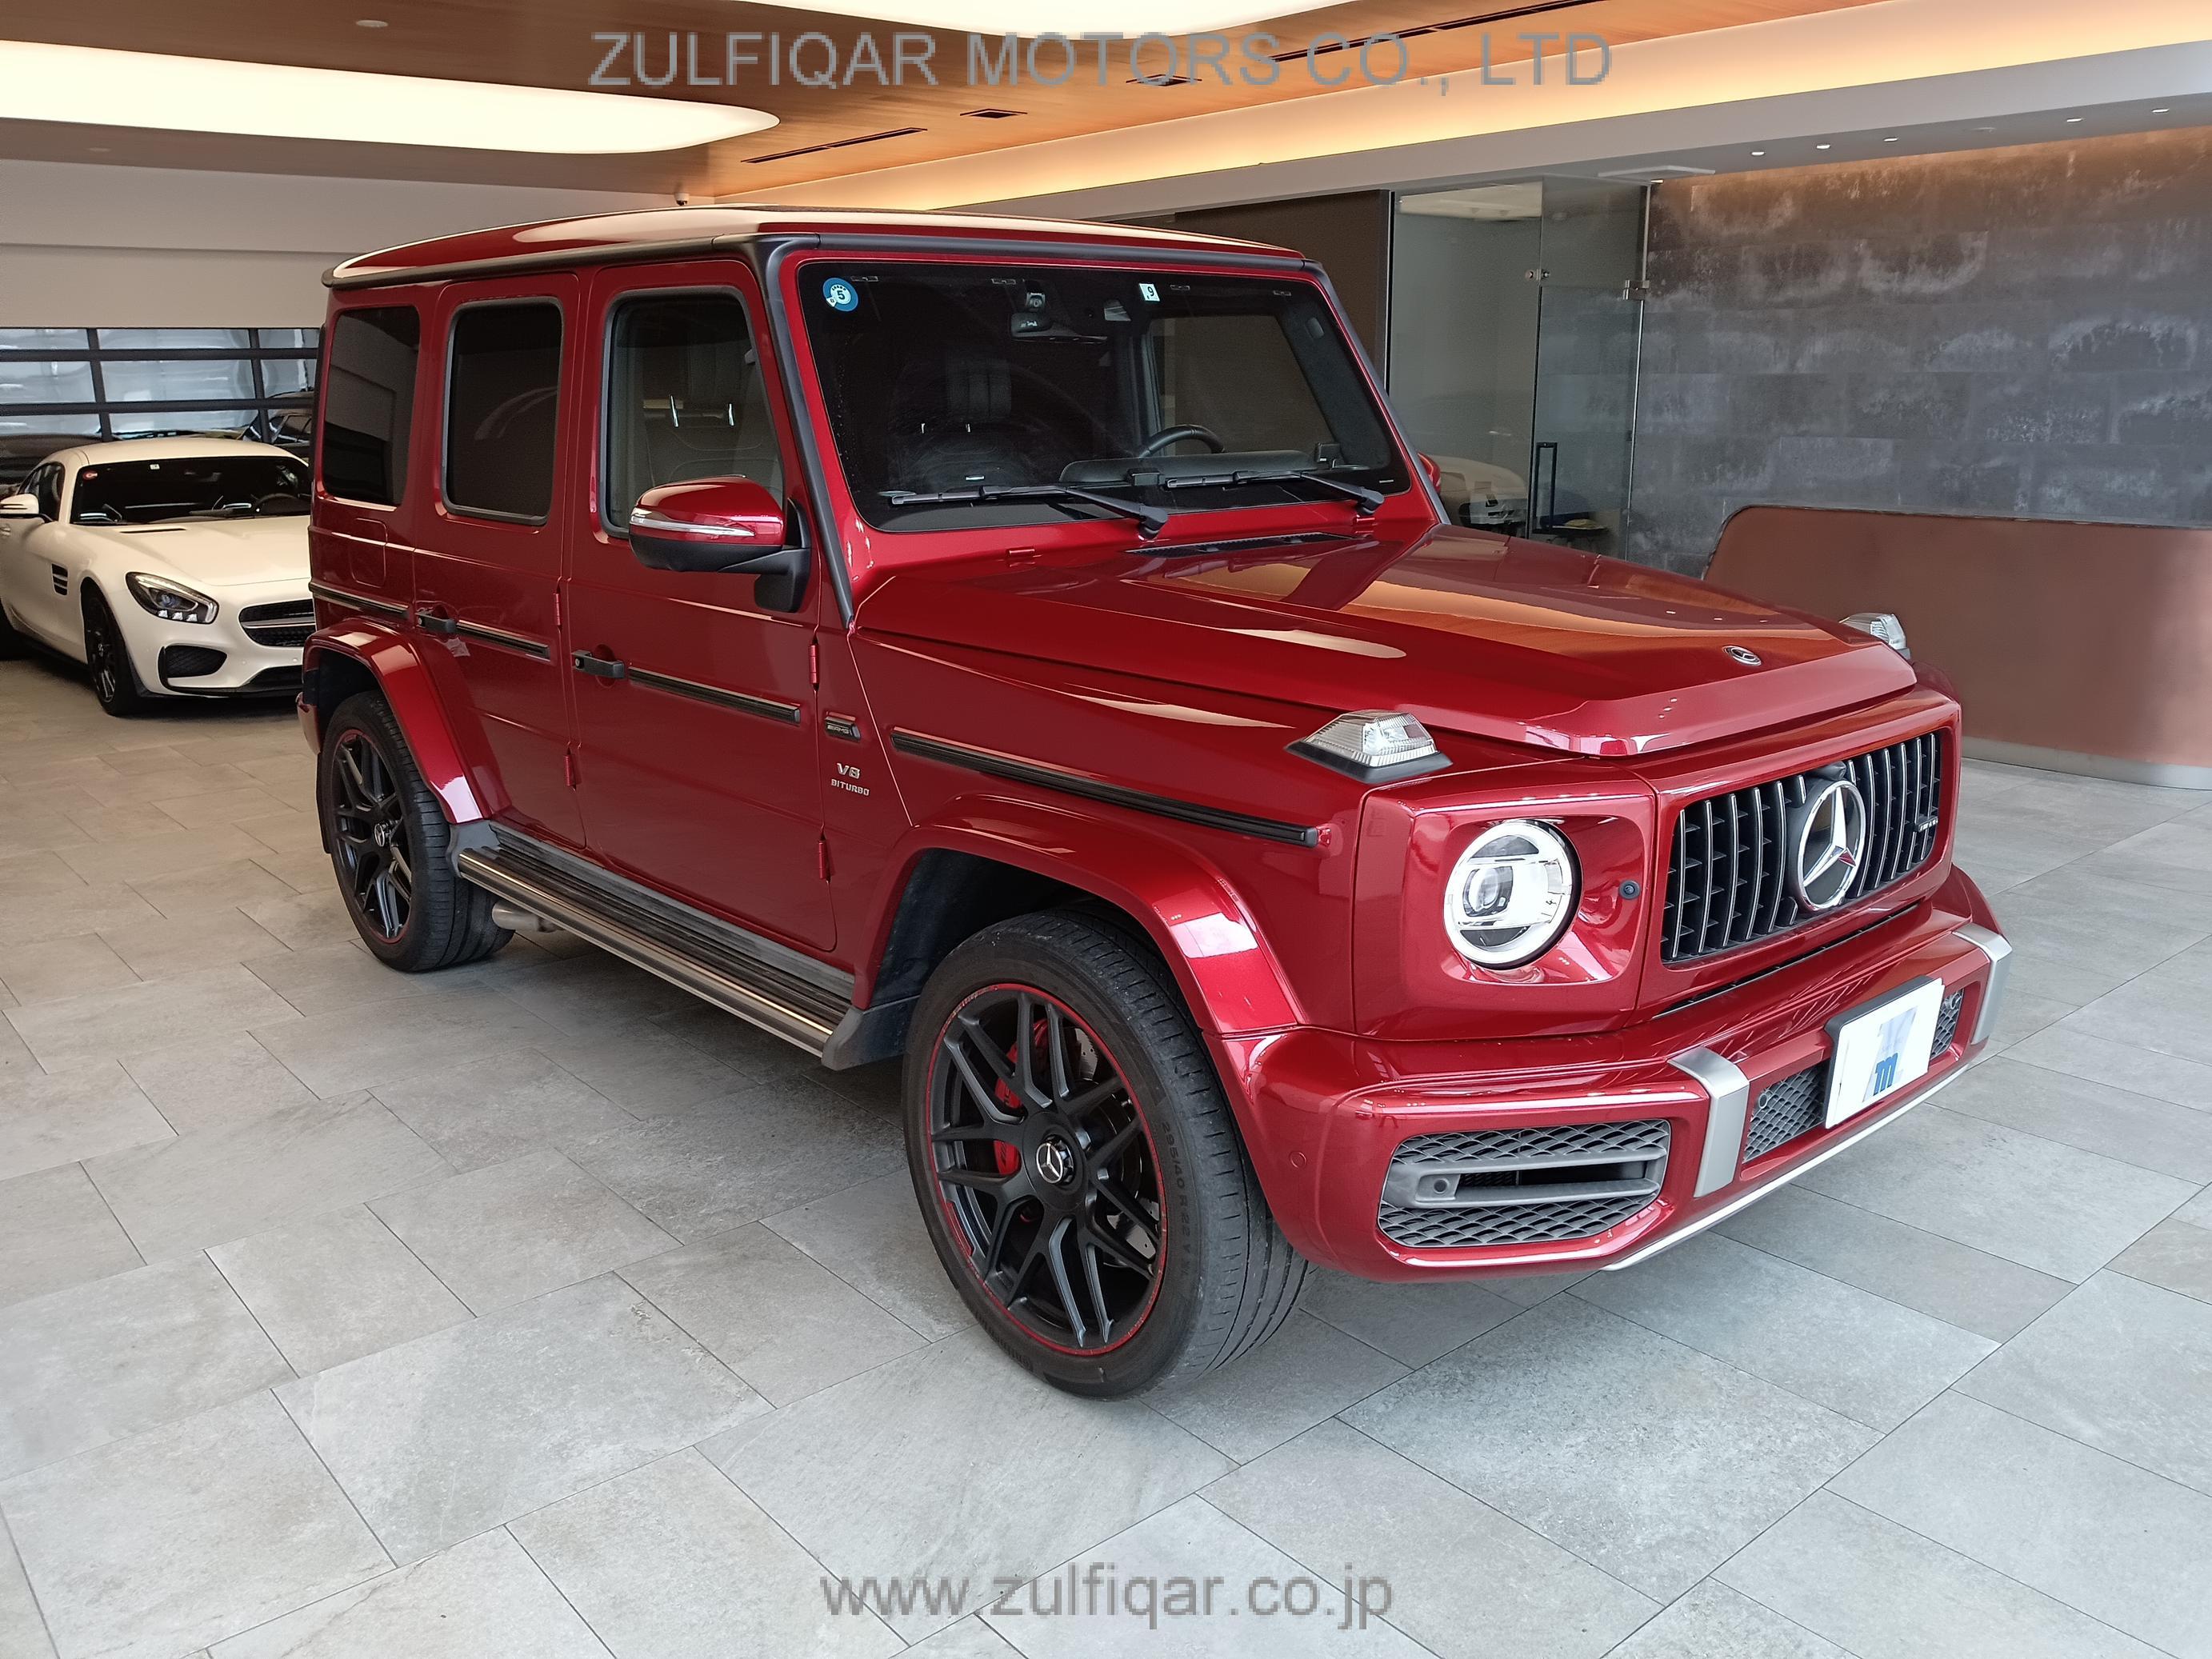 MERCEDES AMG G CLASS 2019 Image 8